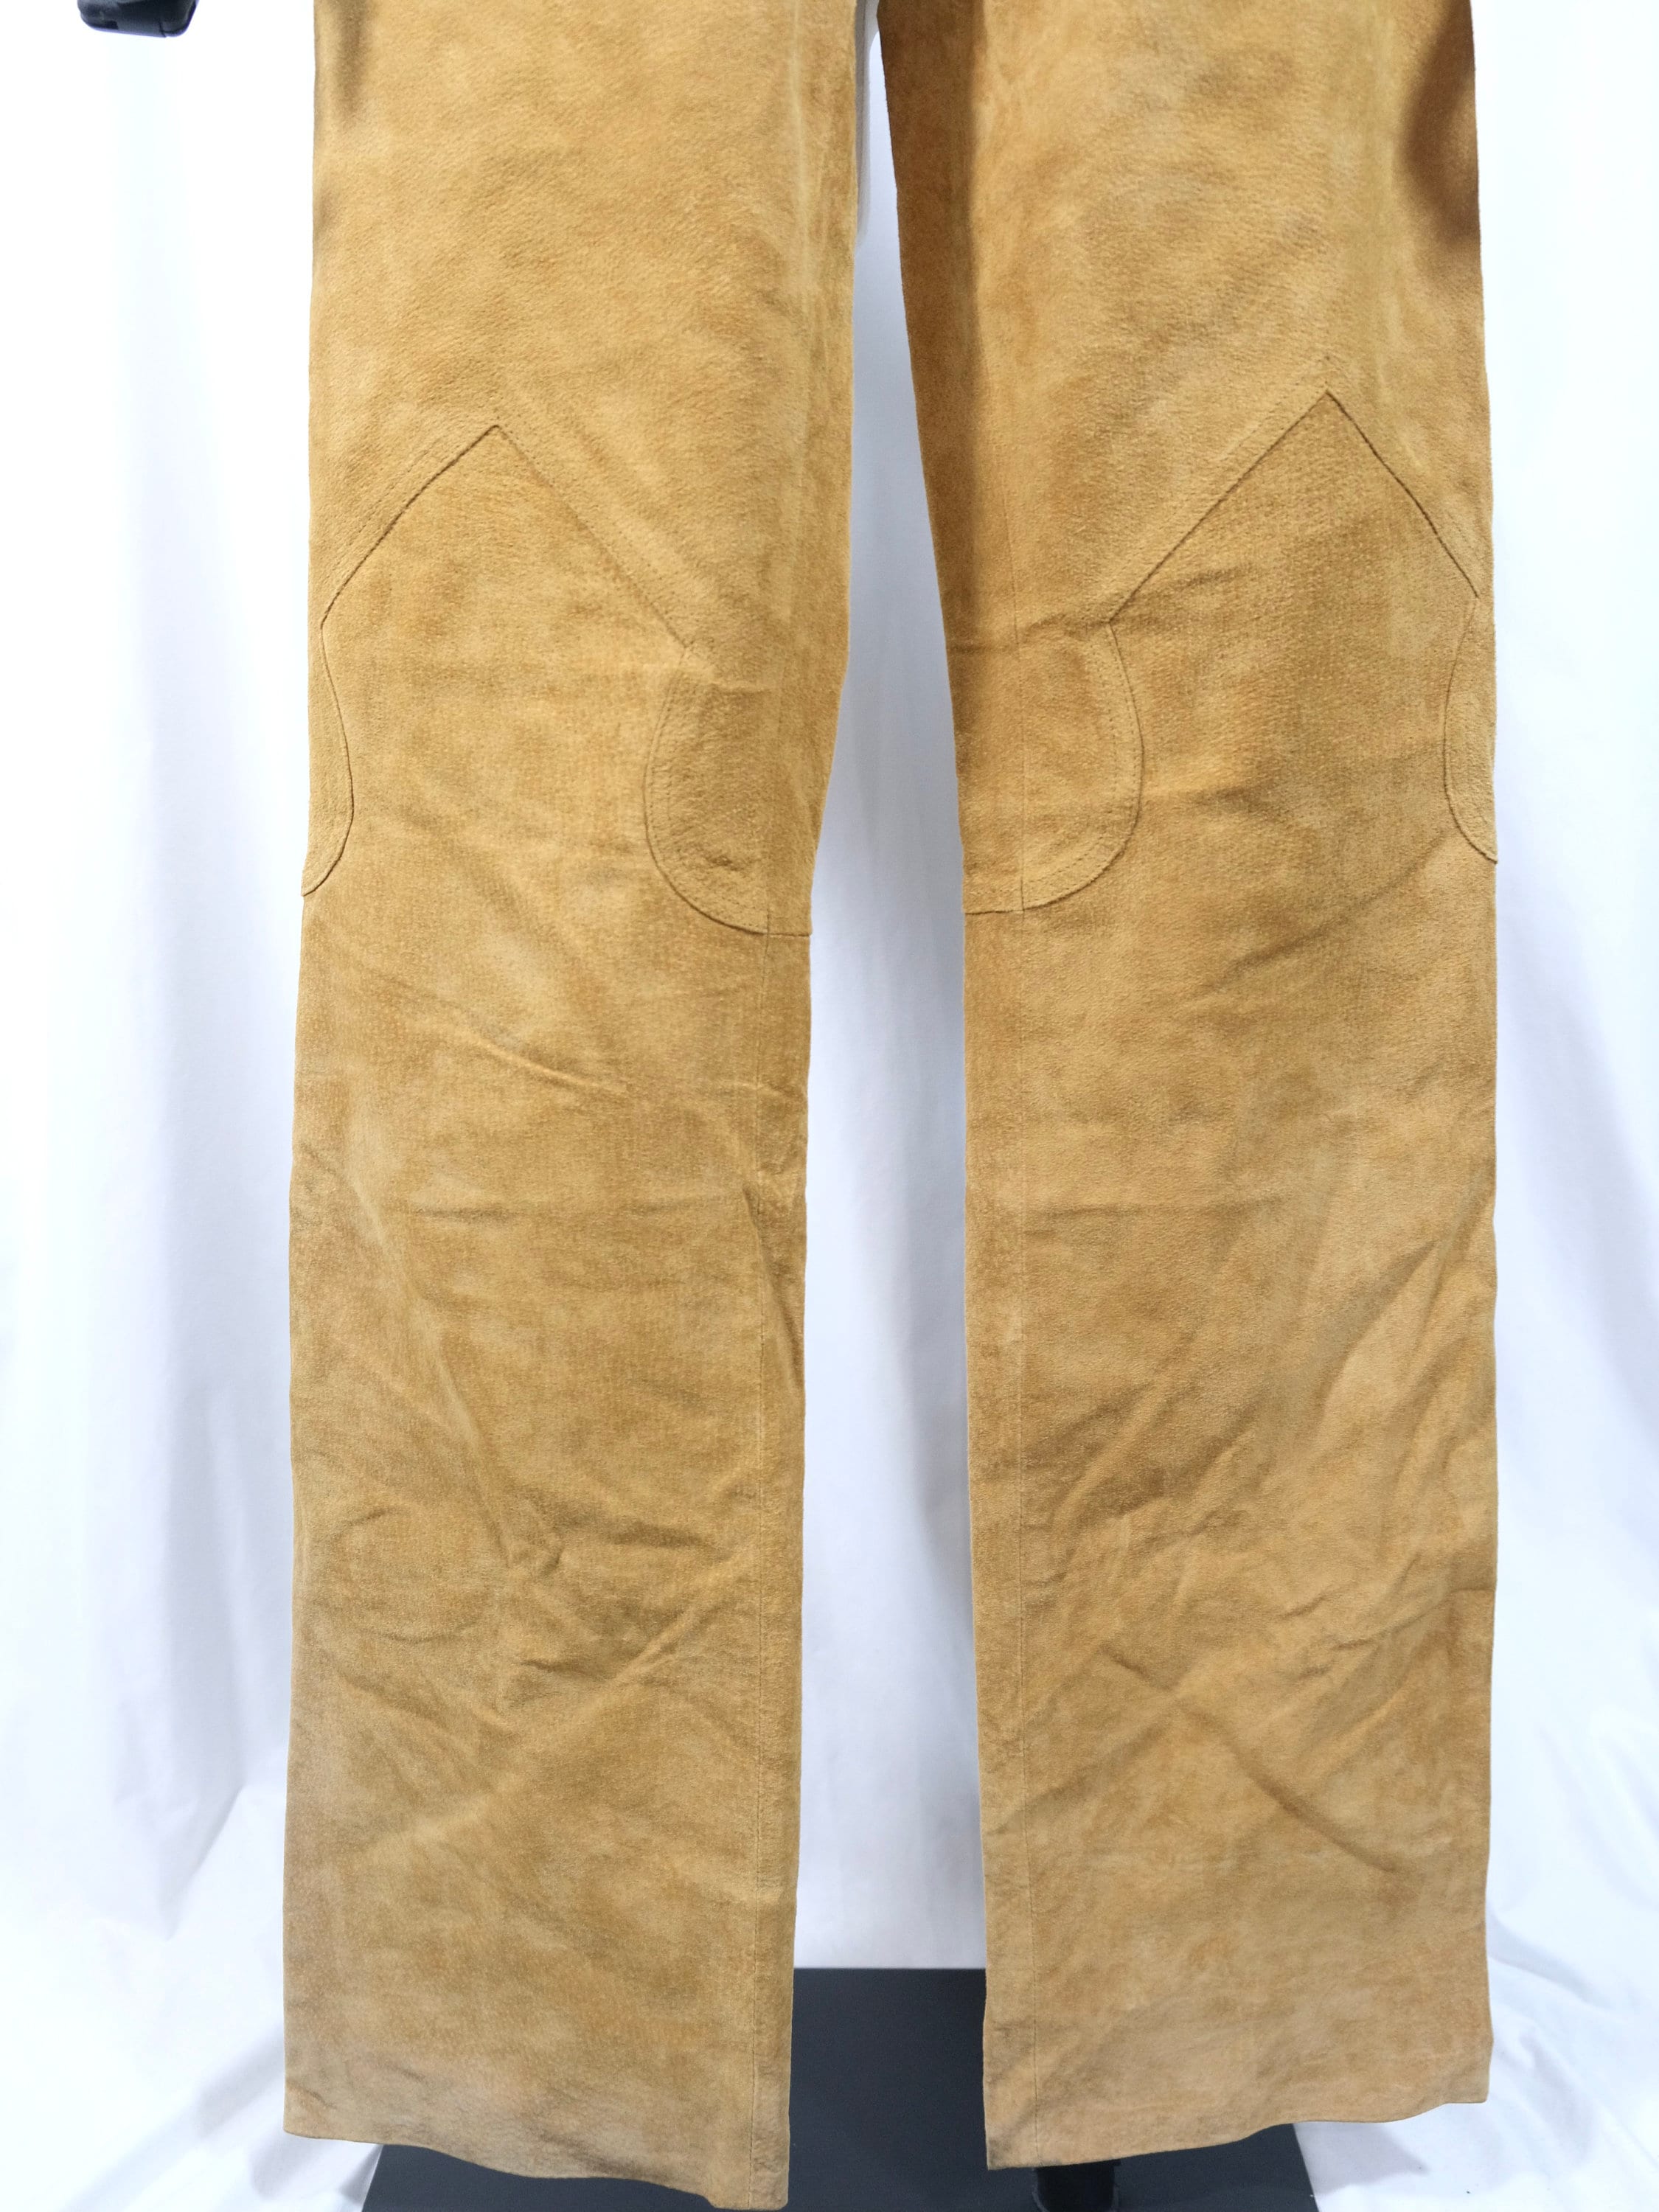 Real Skin Pants / Straight Cut / Size XS -  Canada